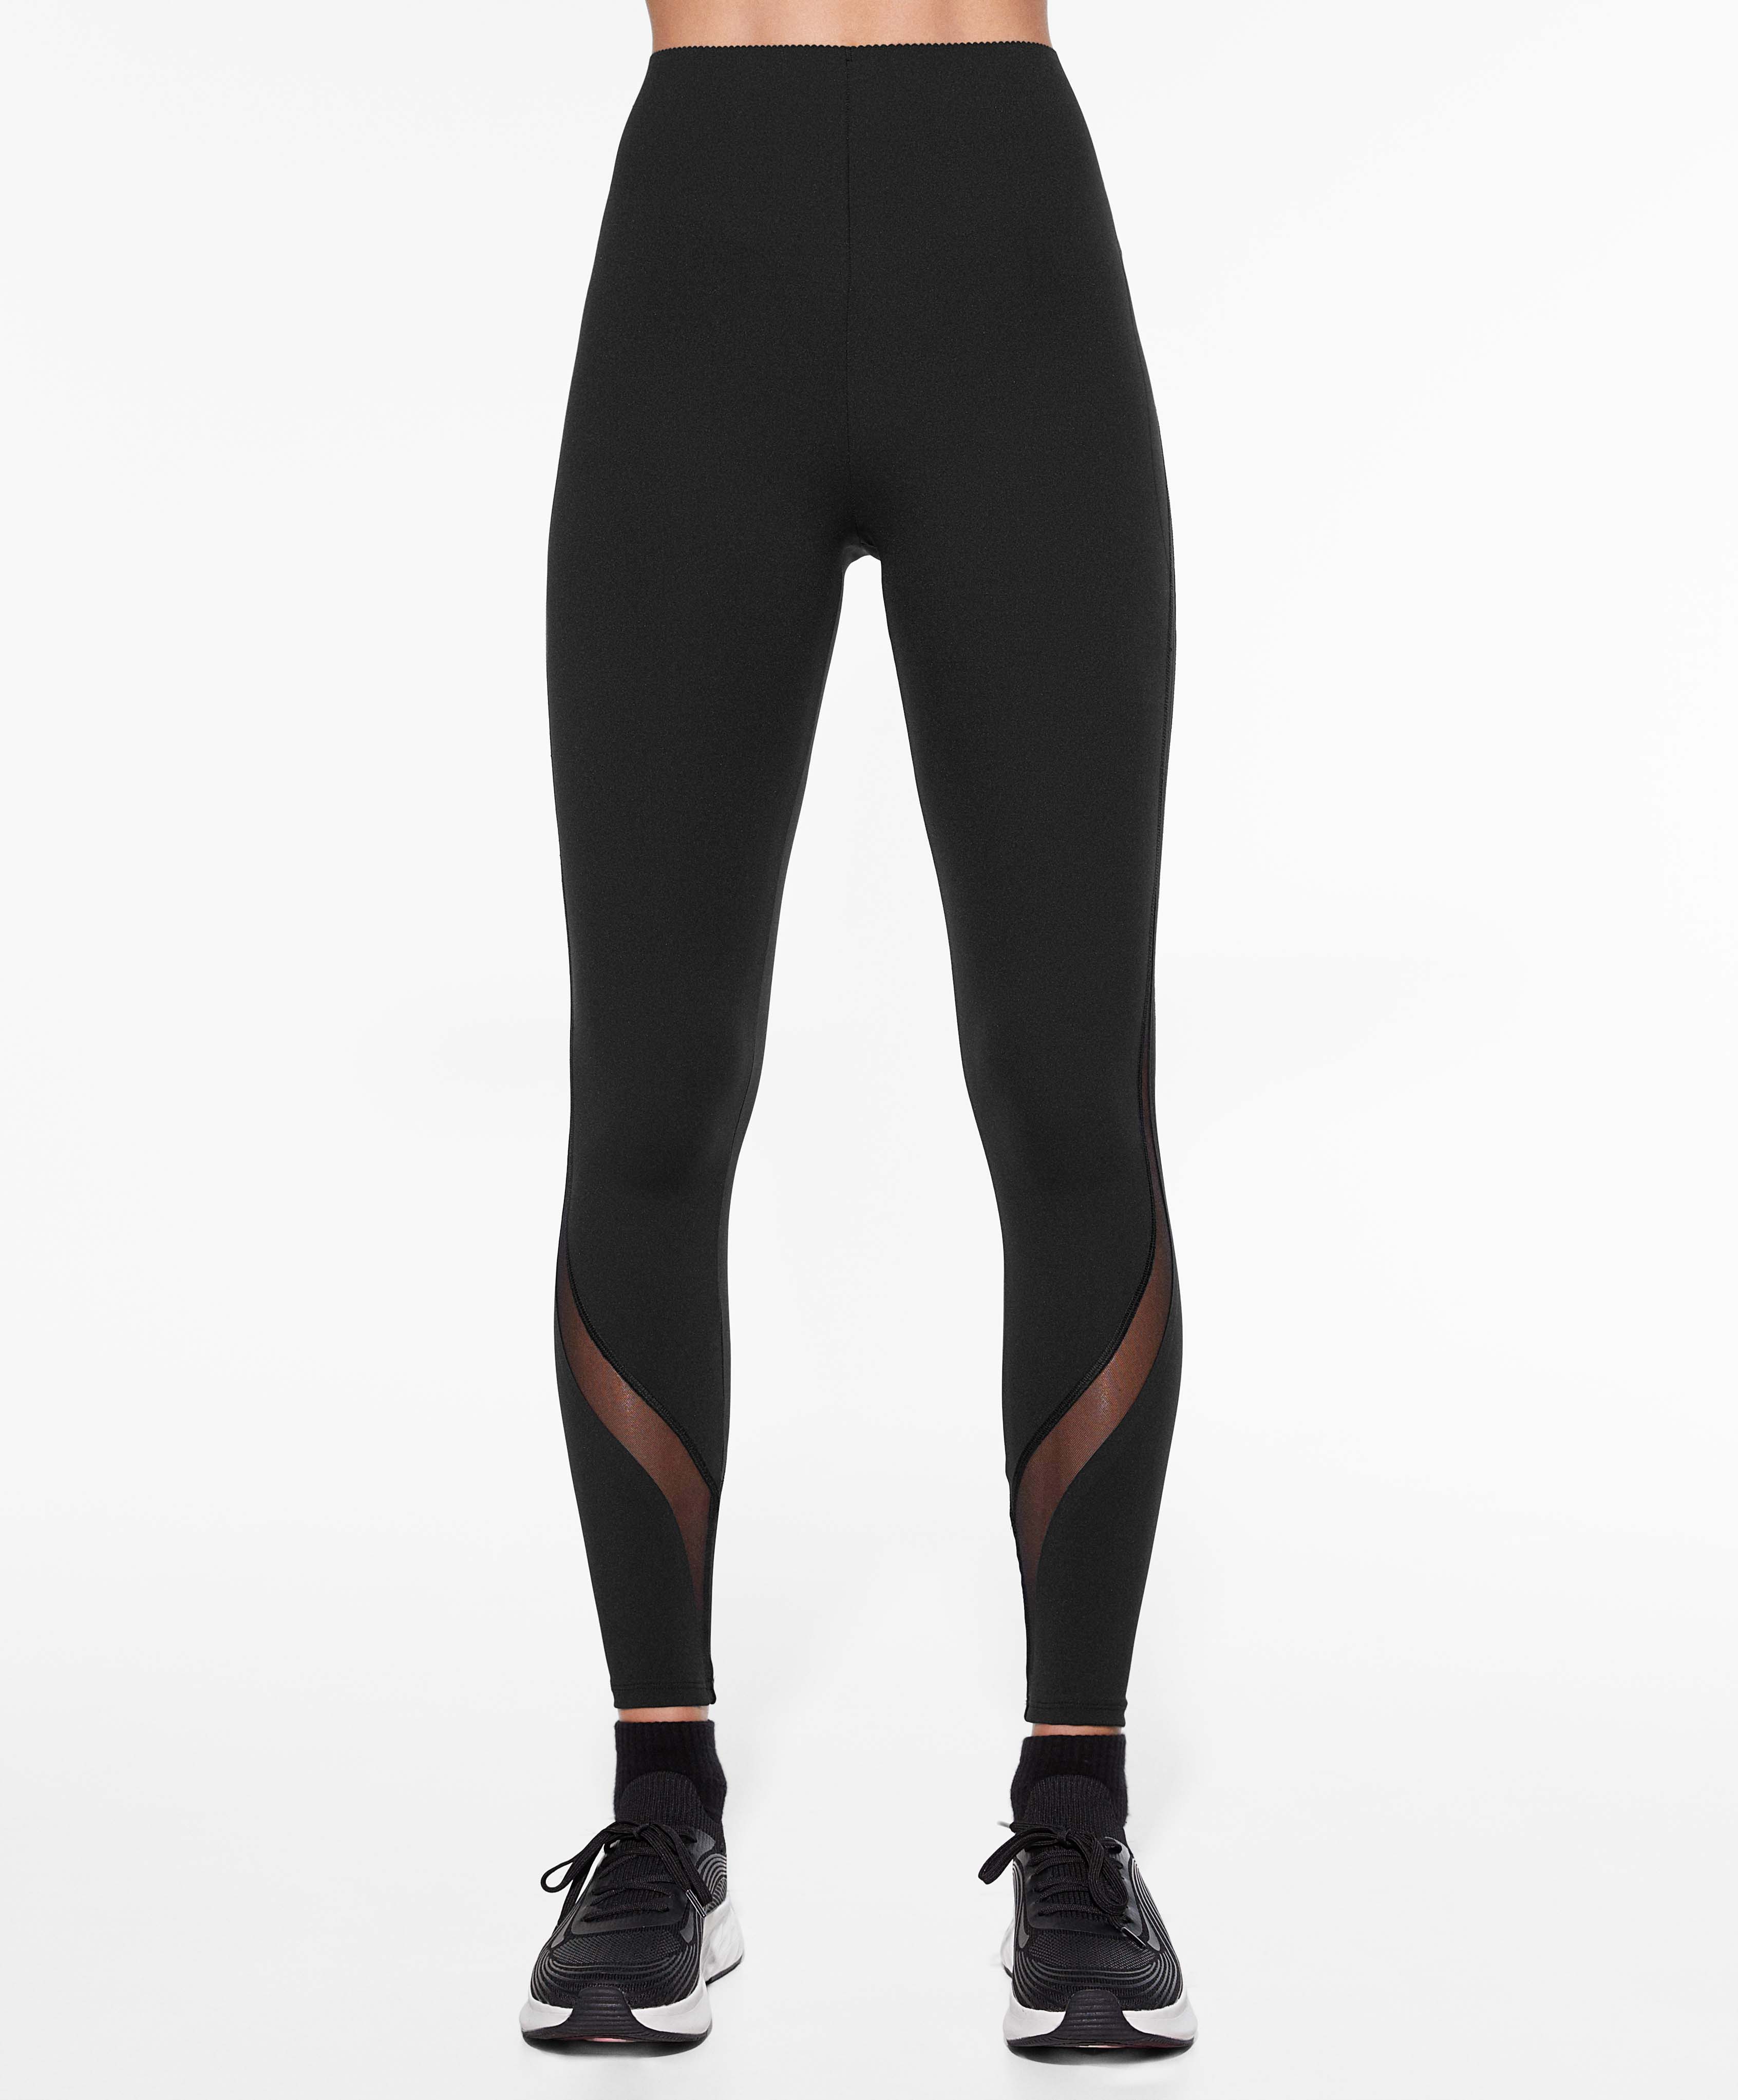 Lululemon Black High Rise Compression Leggings Mesh Sides Womens Size 4-6 -  $27 - From Taylor